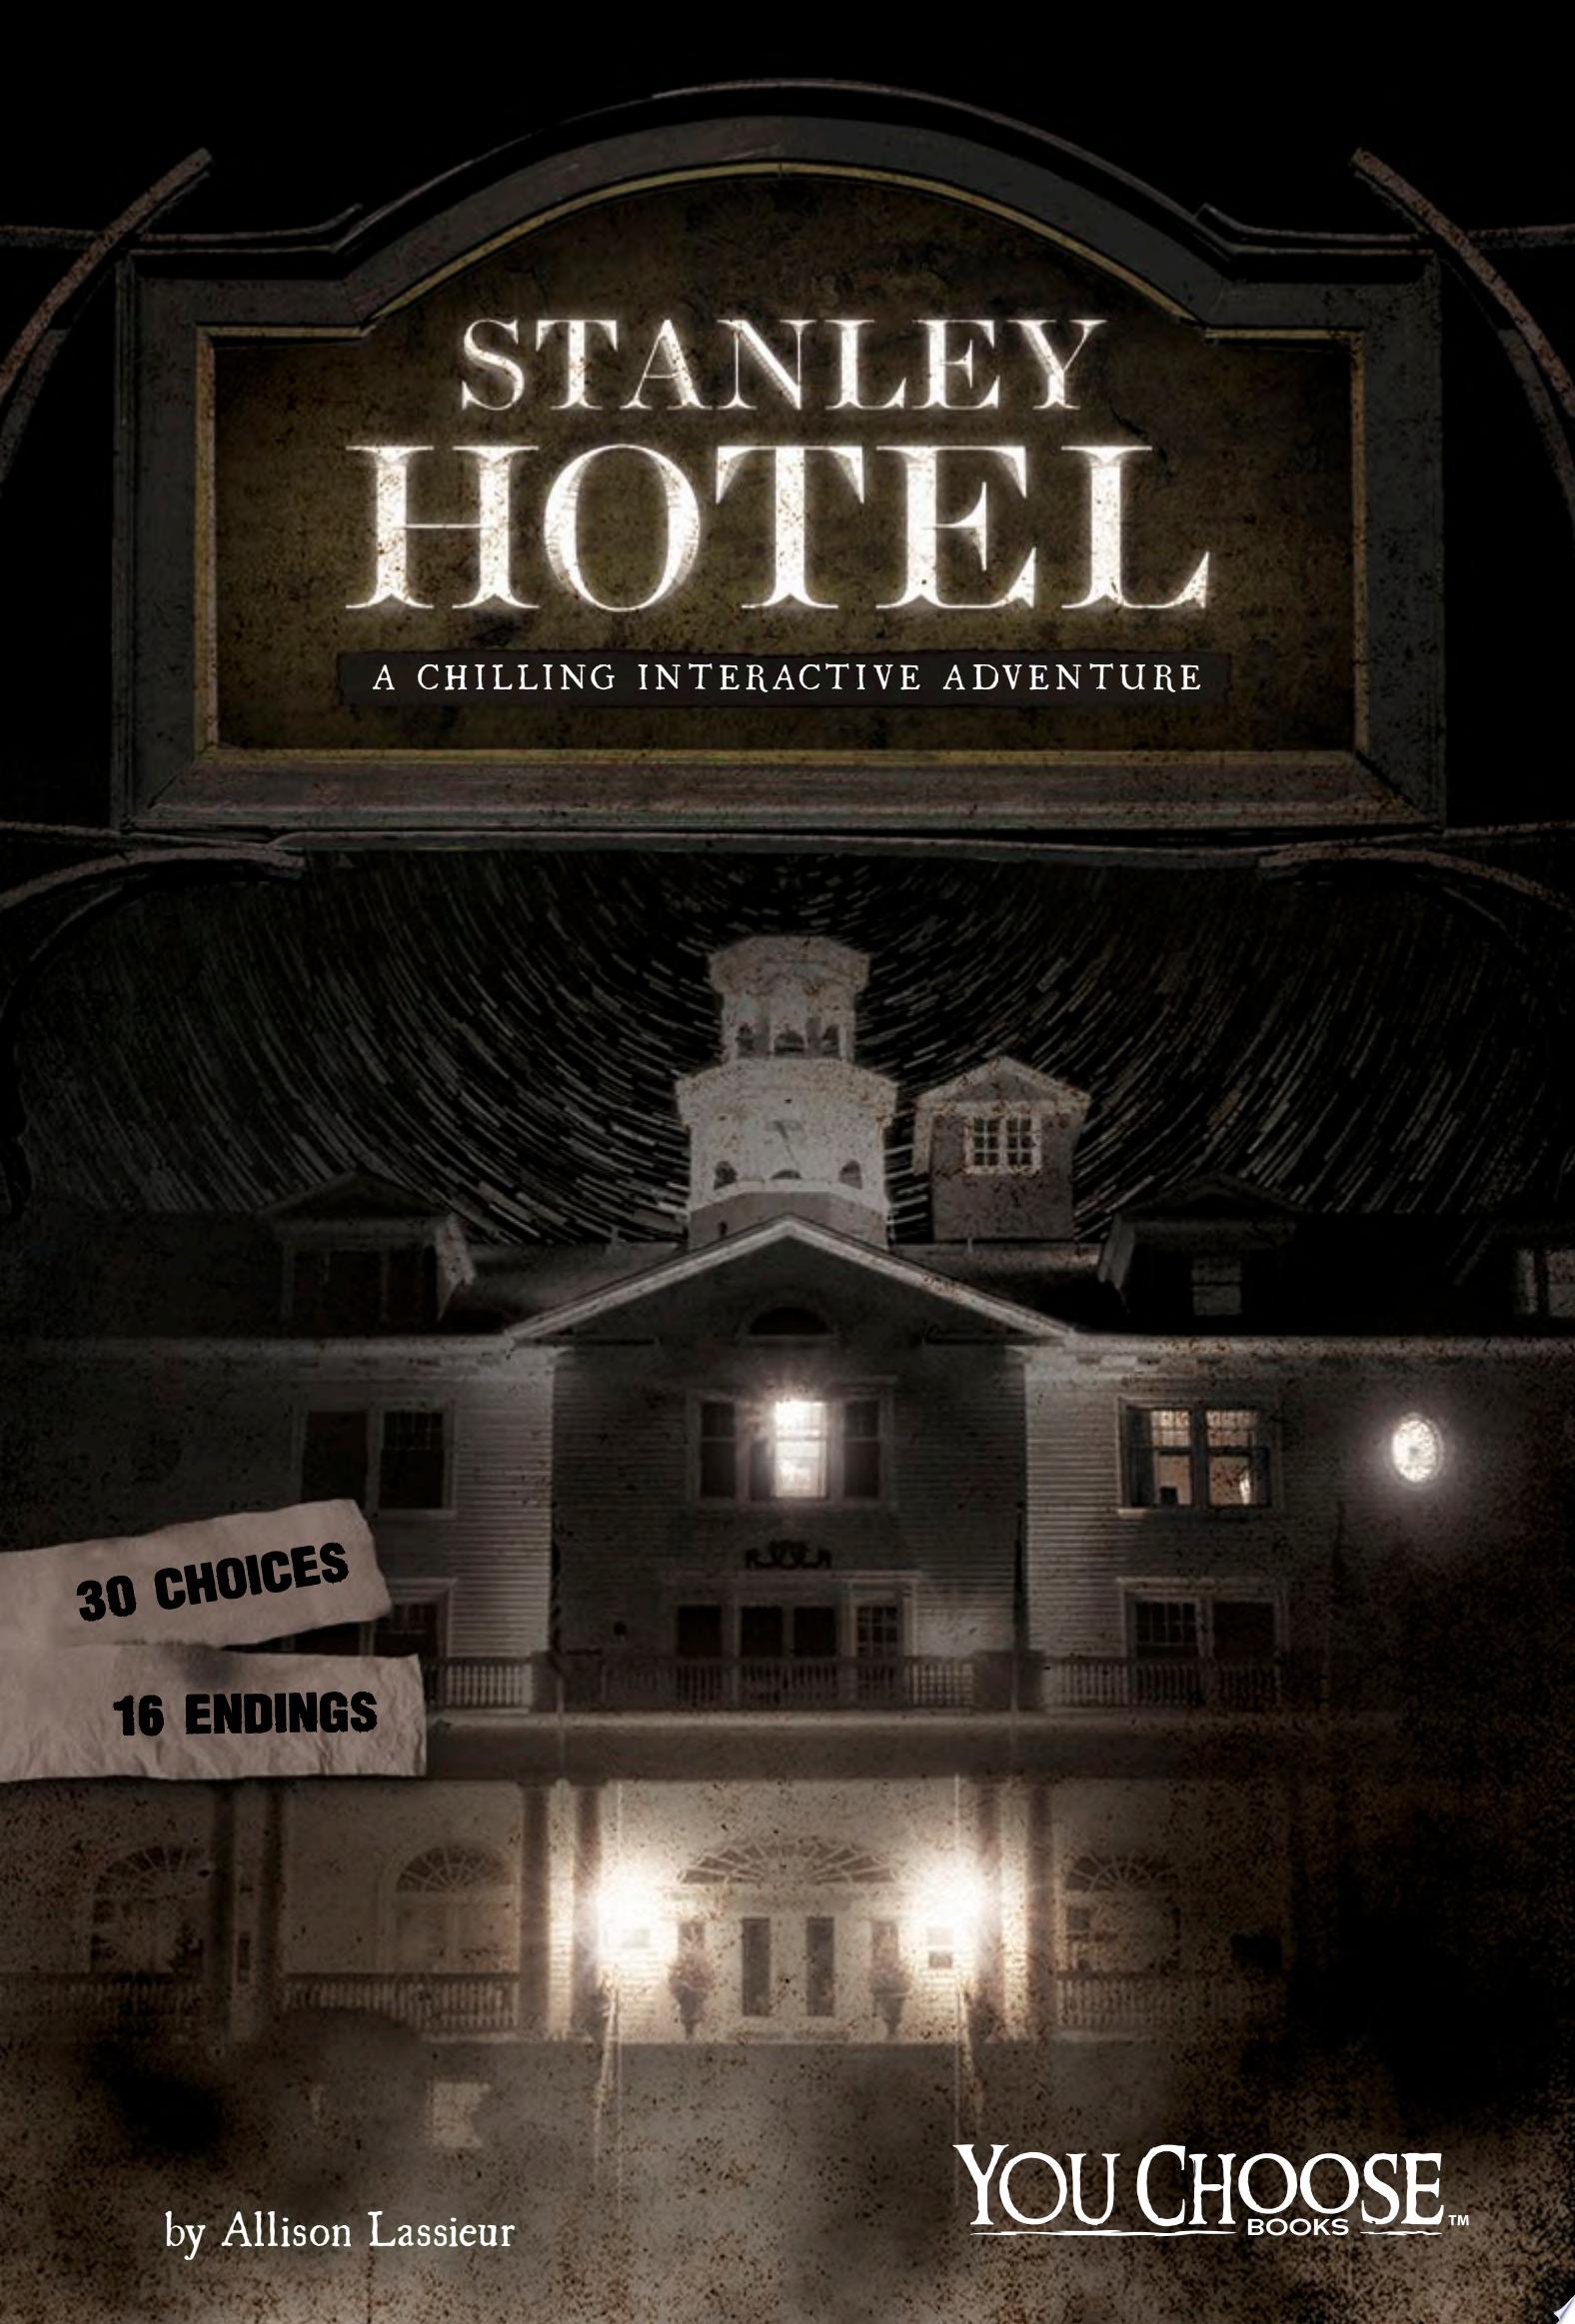 Image for "Stanley Hotel"